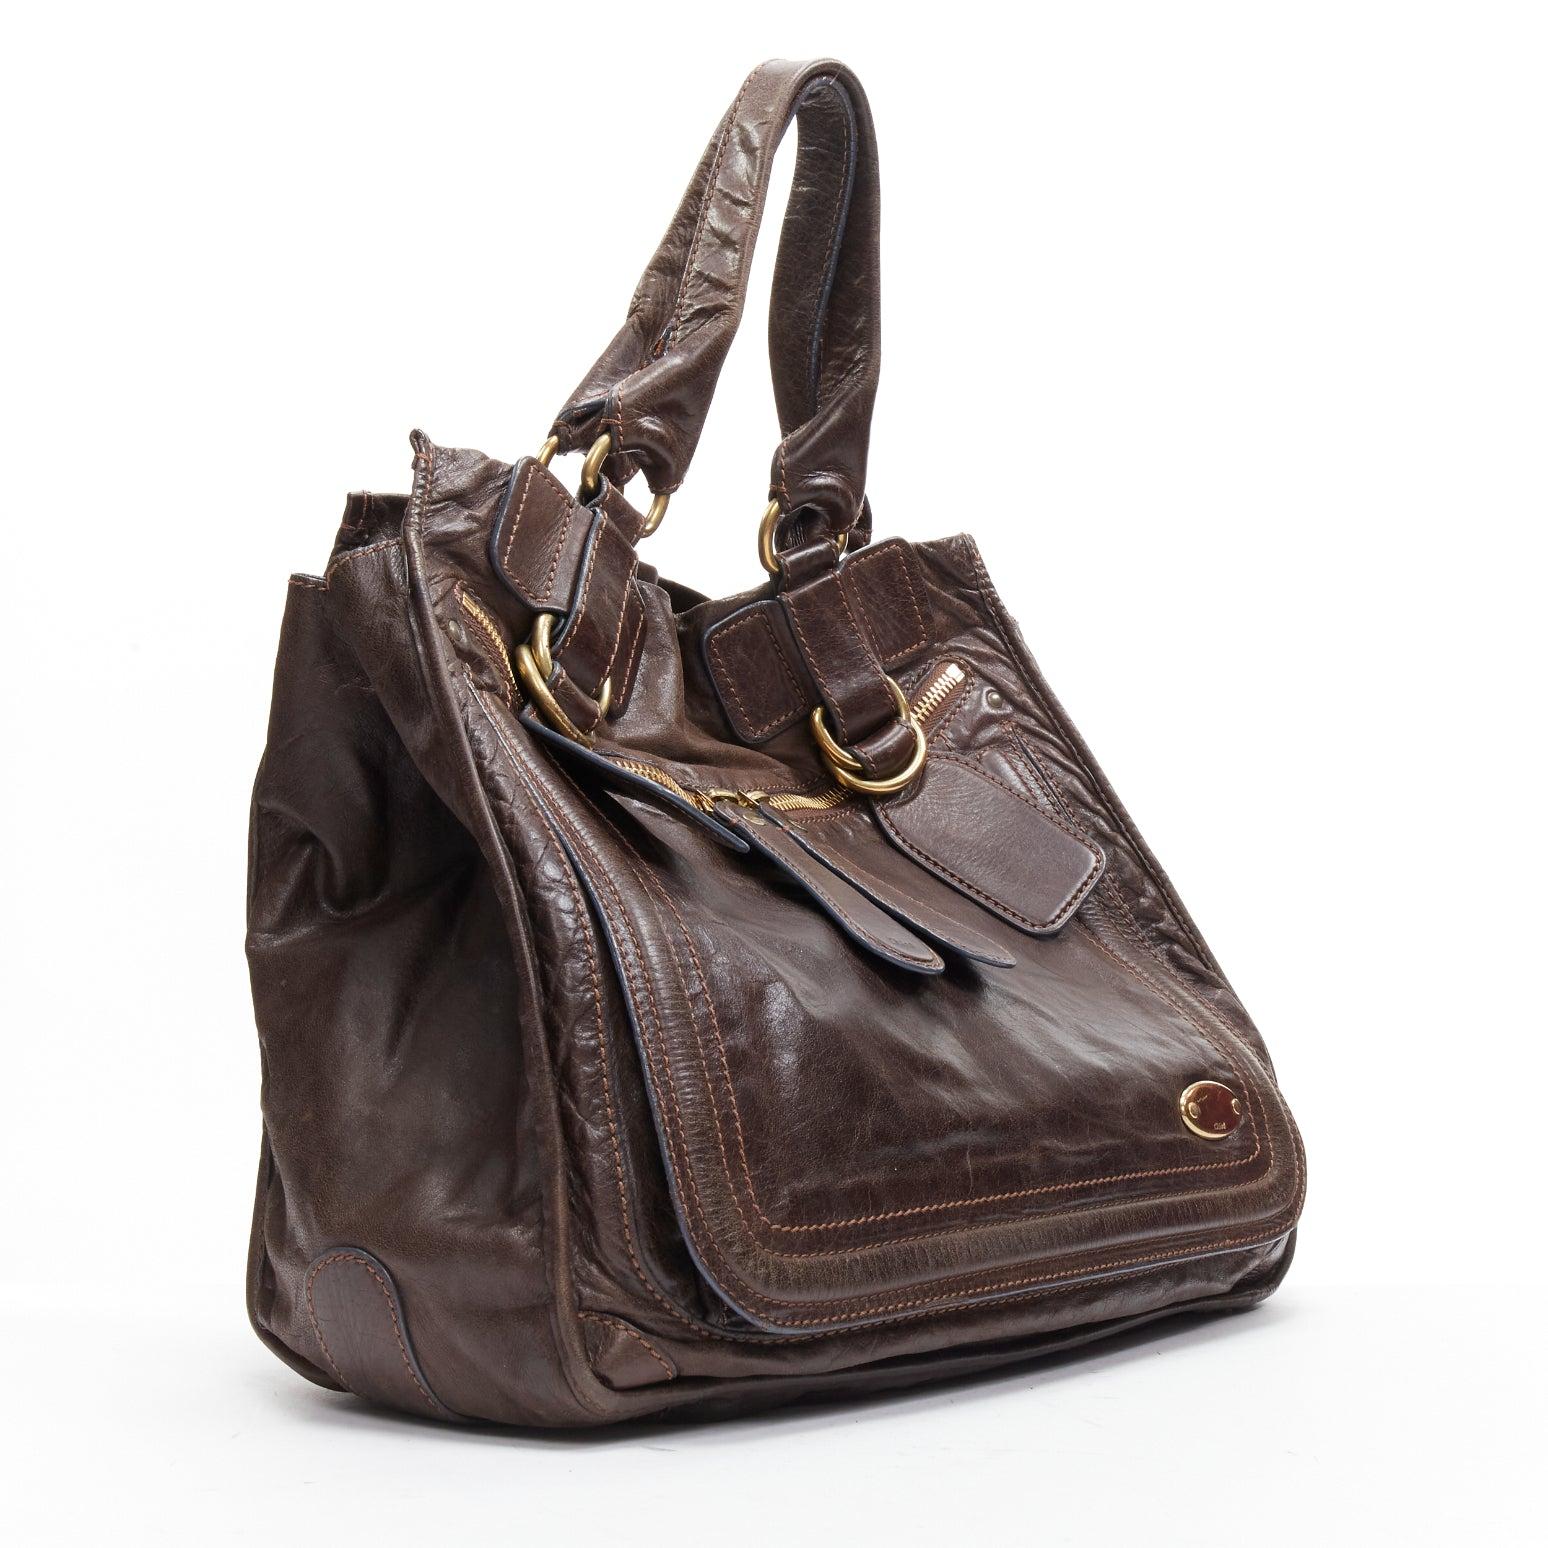 soft leather tote bag with zipper